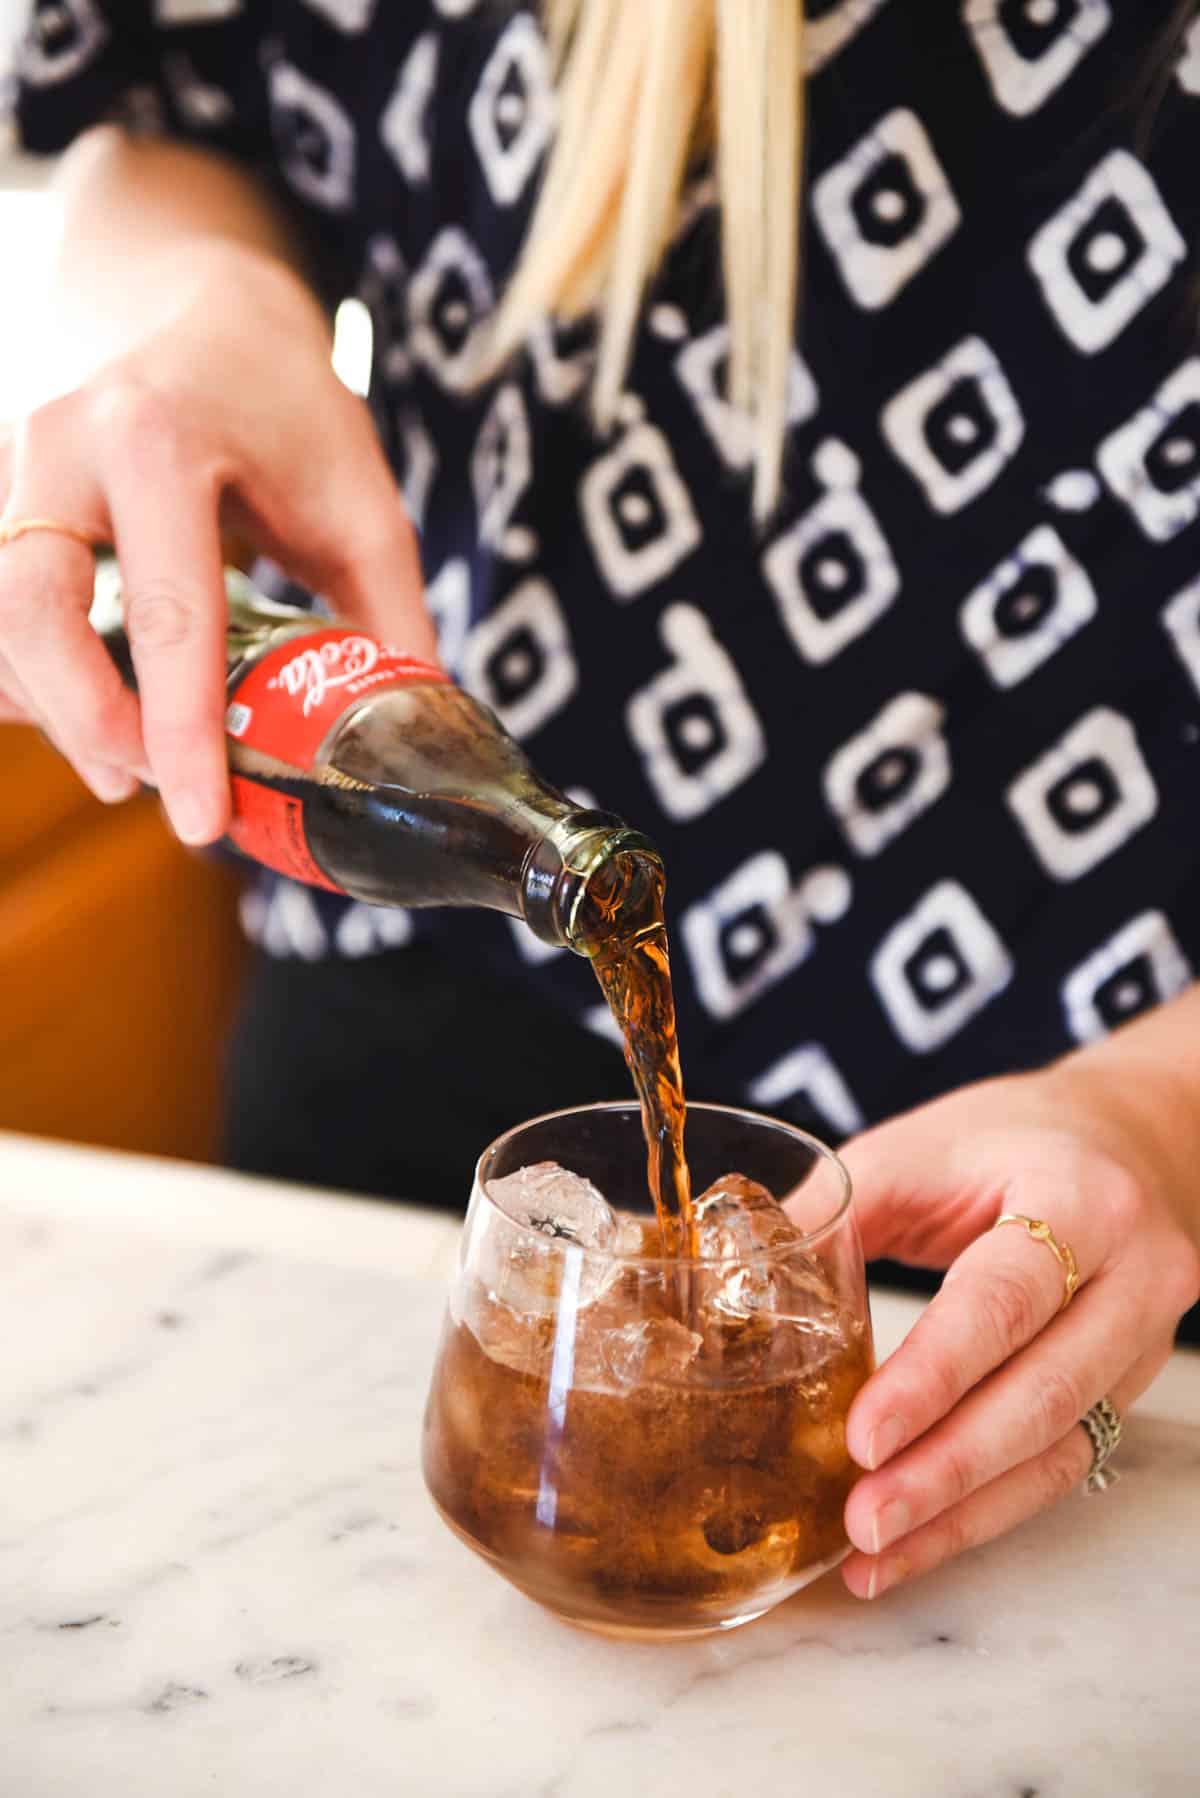 A women pouring in the Coke for this Tequila with Coke recipe.